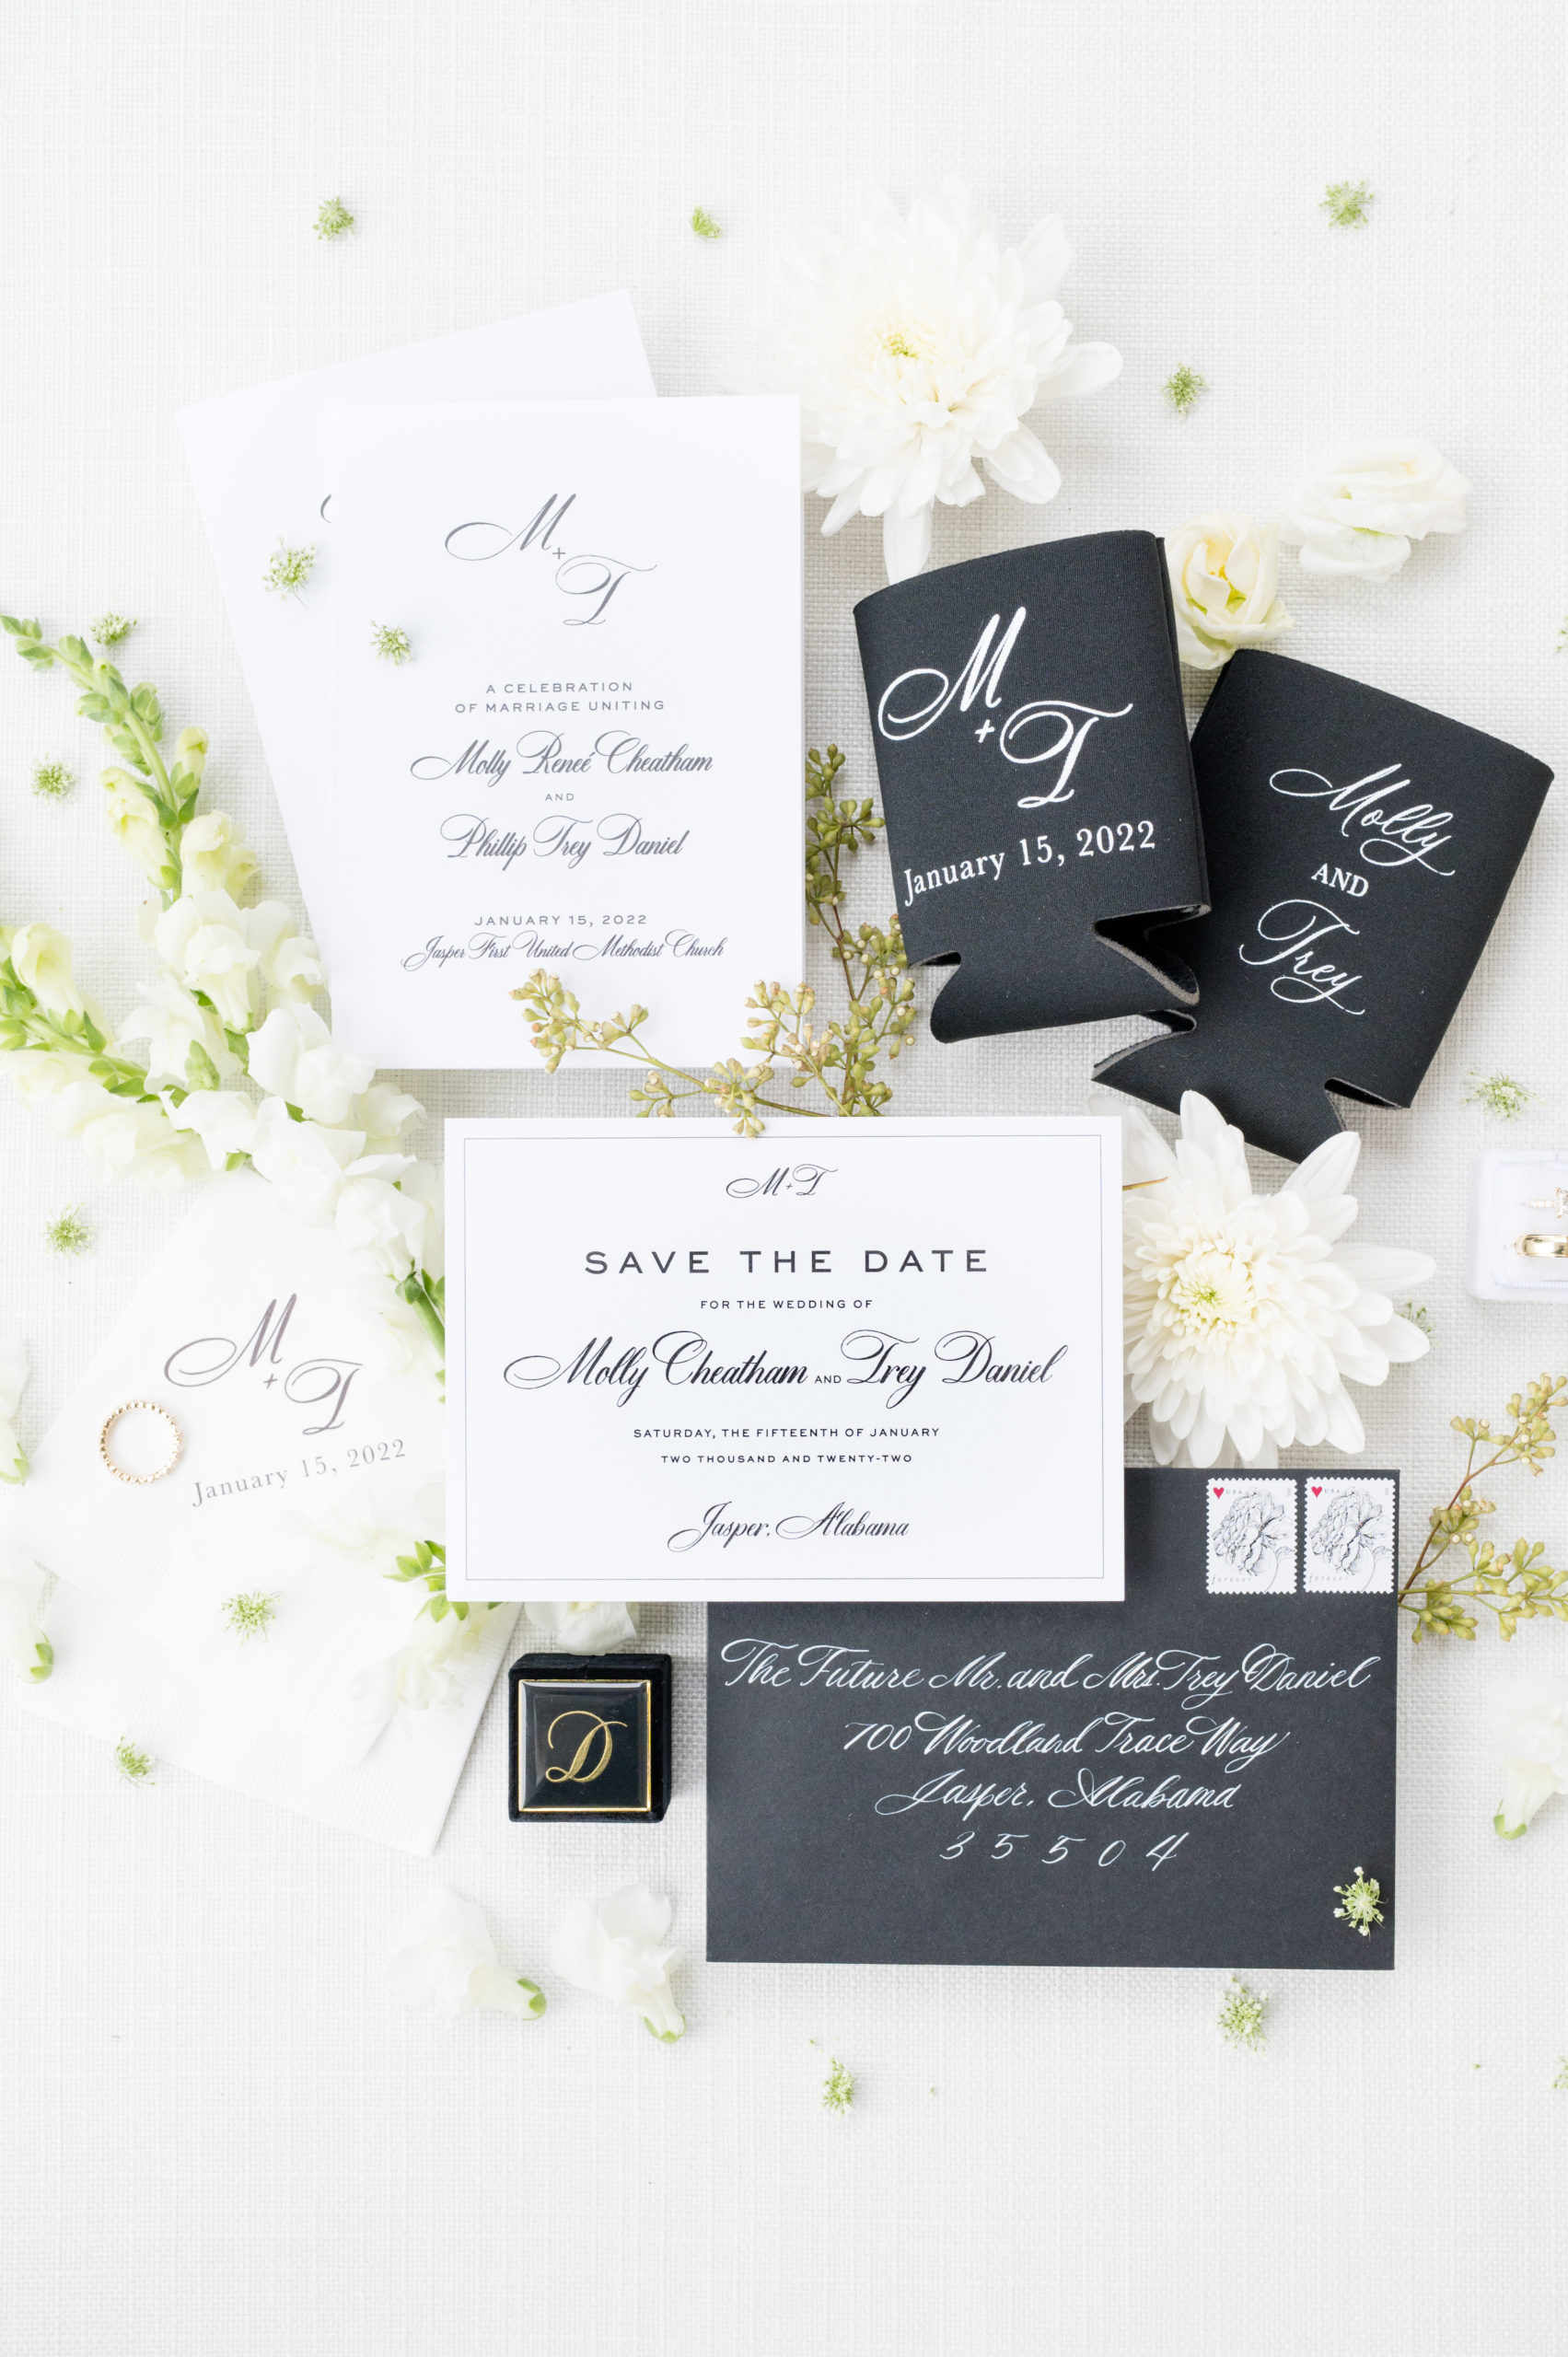 Save the date and reception details sits with flowers.